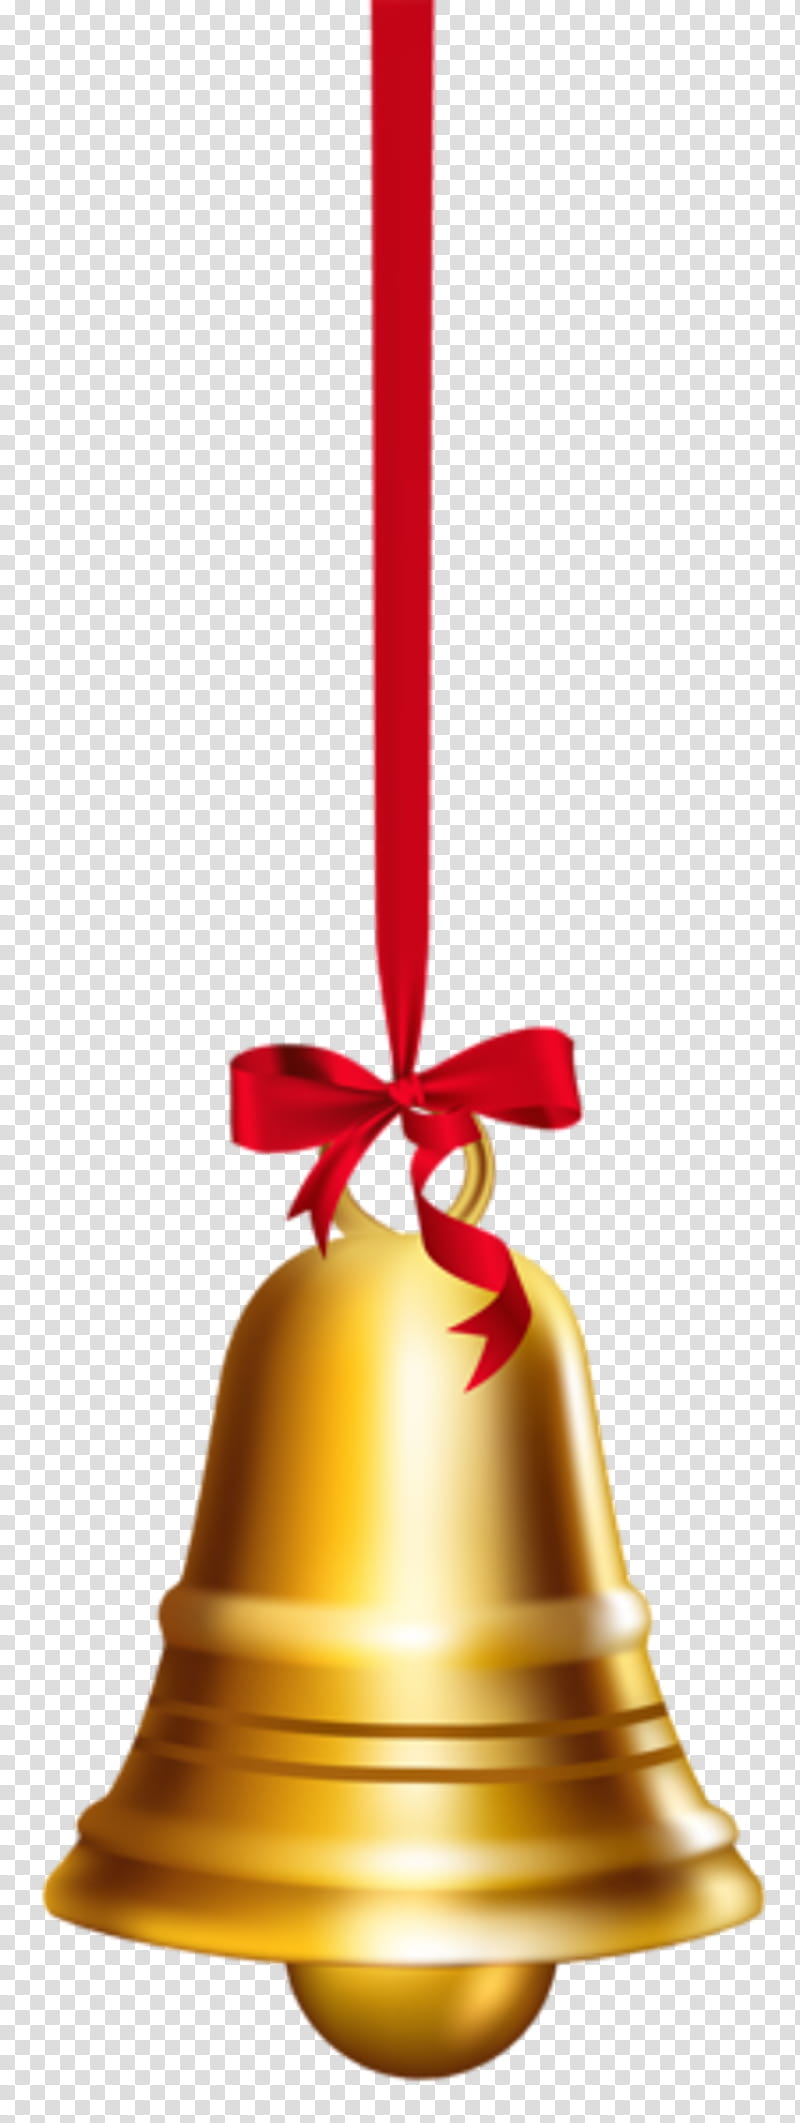 35,626 Christmas Bell Drawing Royalty-Free Photos and Stock Images |  Shutterstock